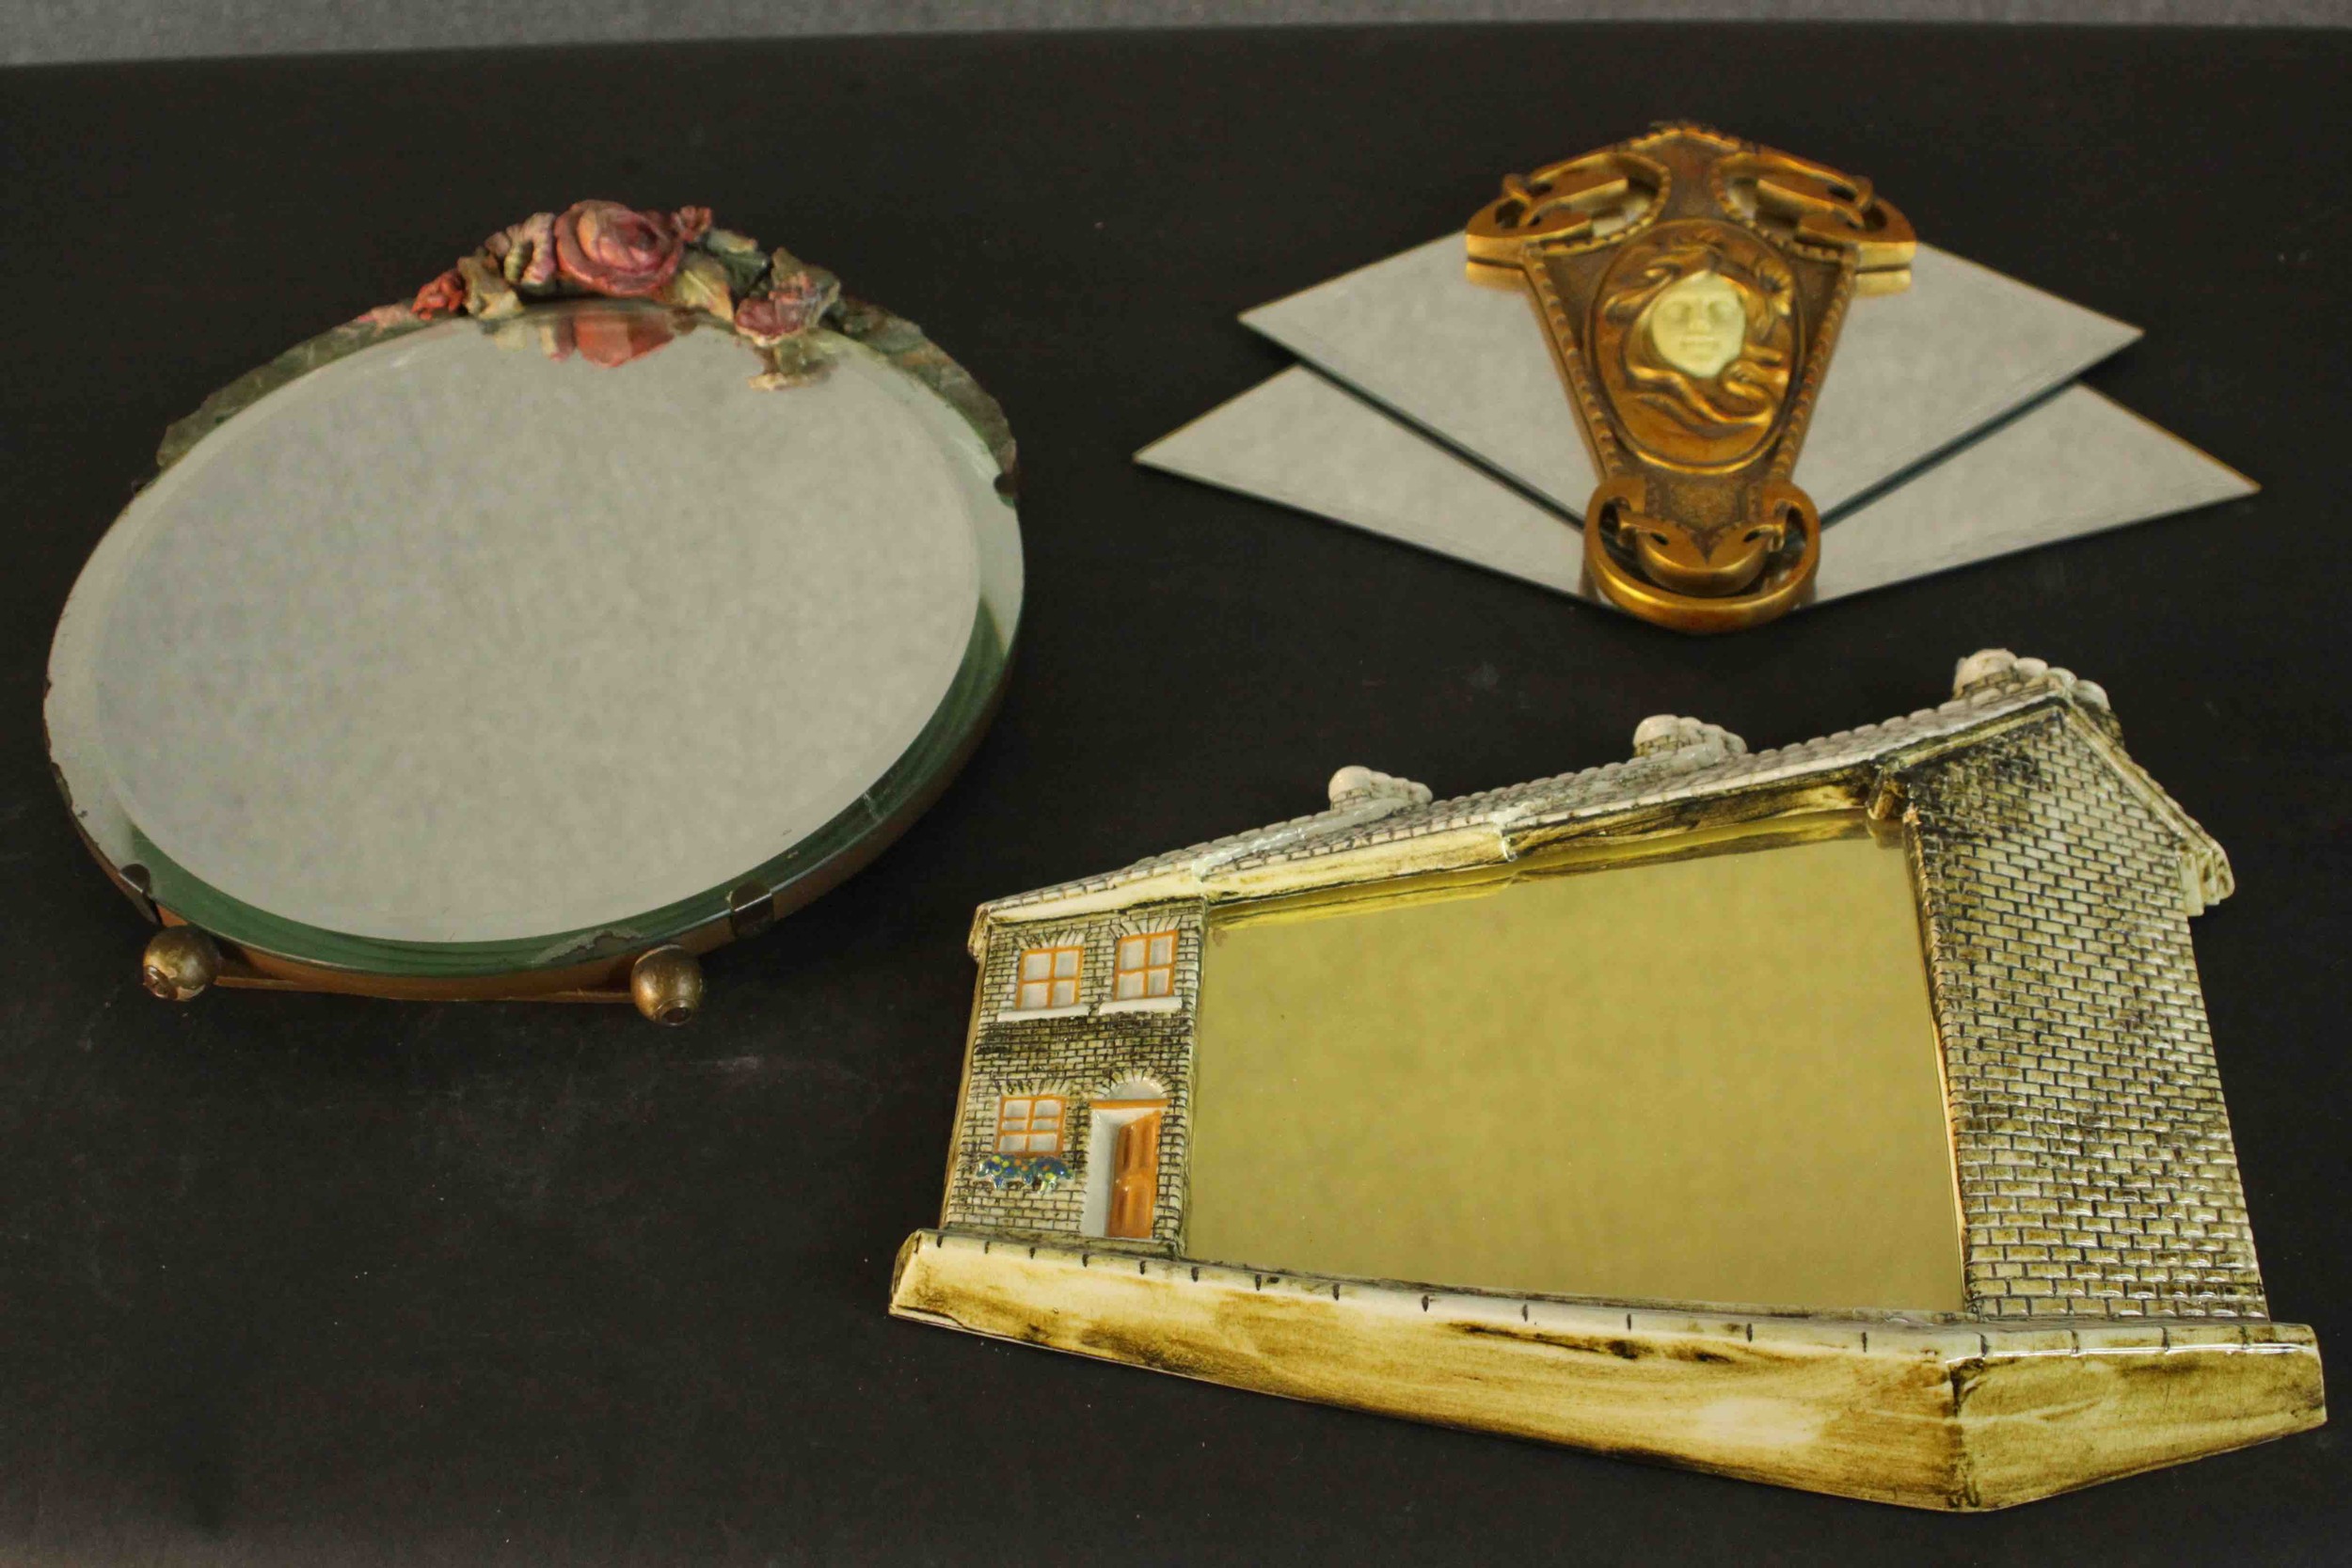 Three vintage mirrors, including a sculpted clay floral design mirror, an Art Nouveau style mirror